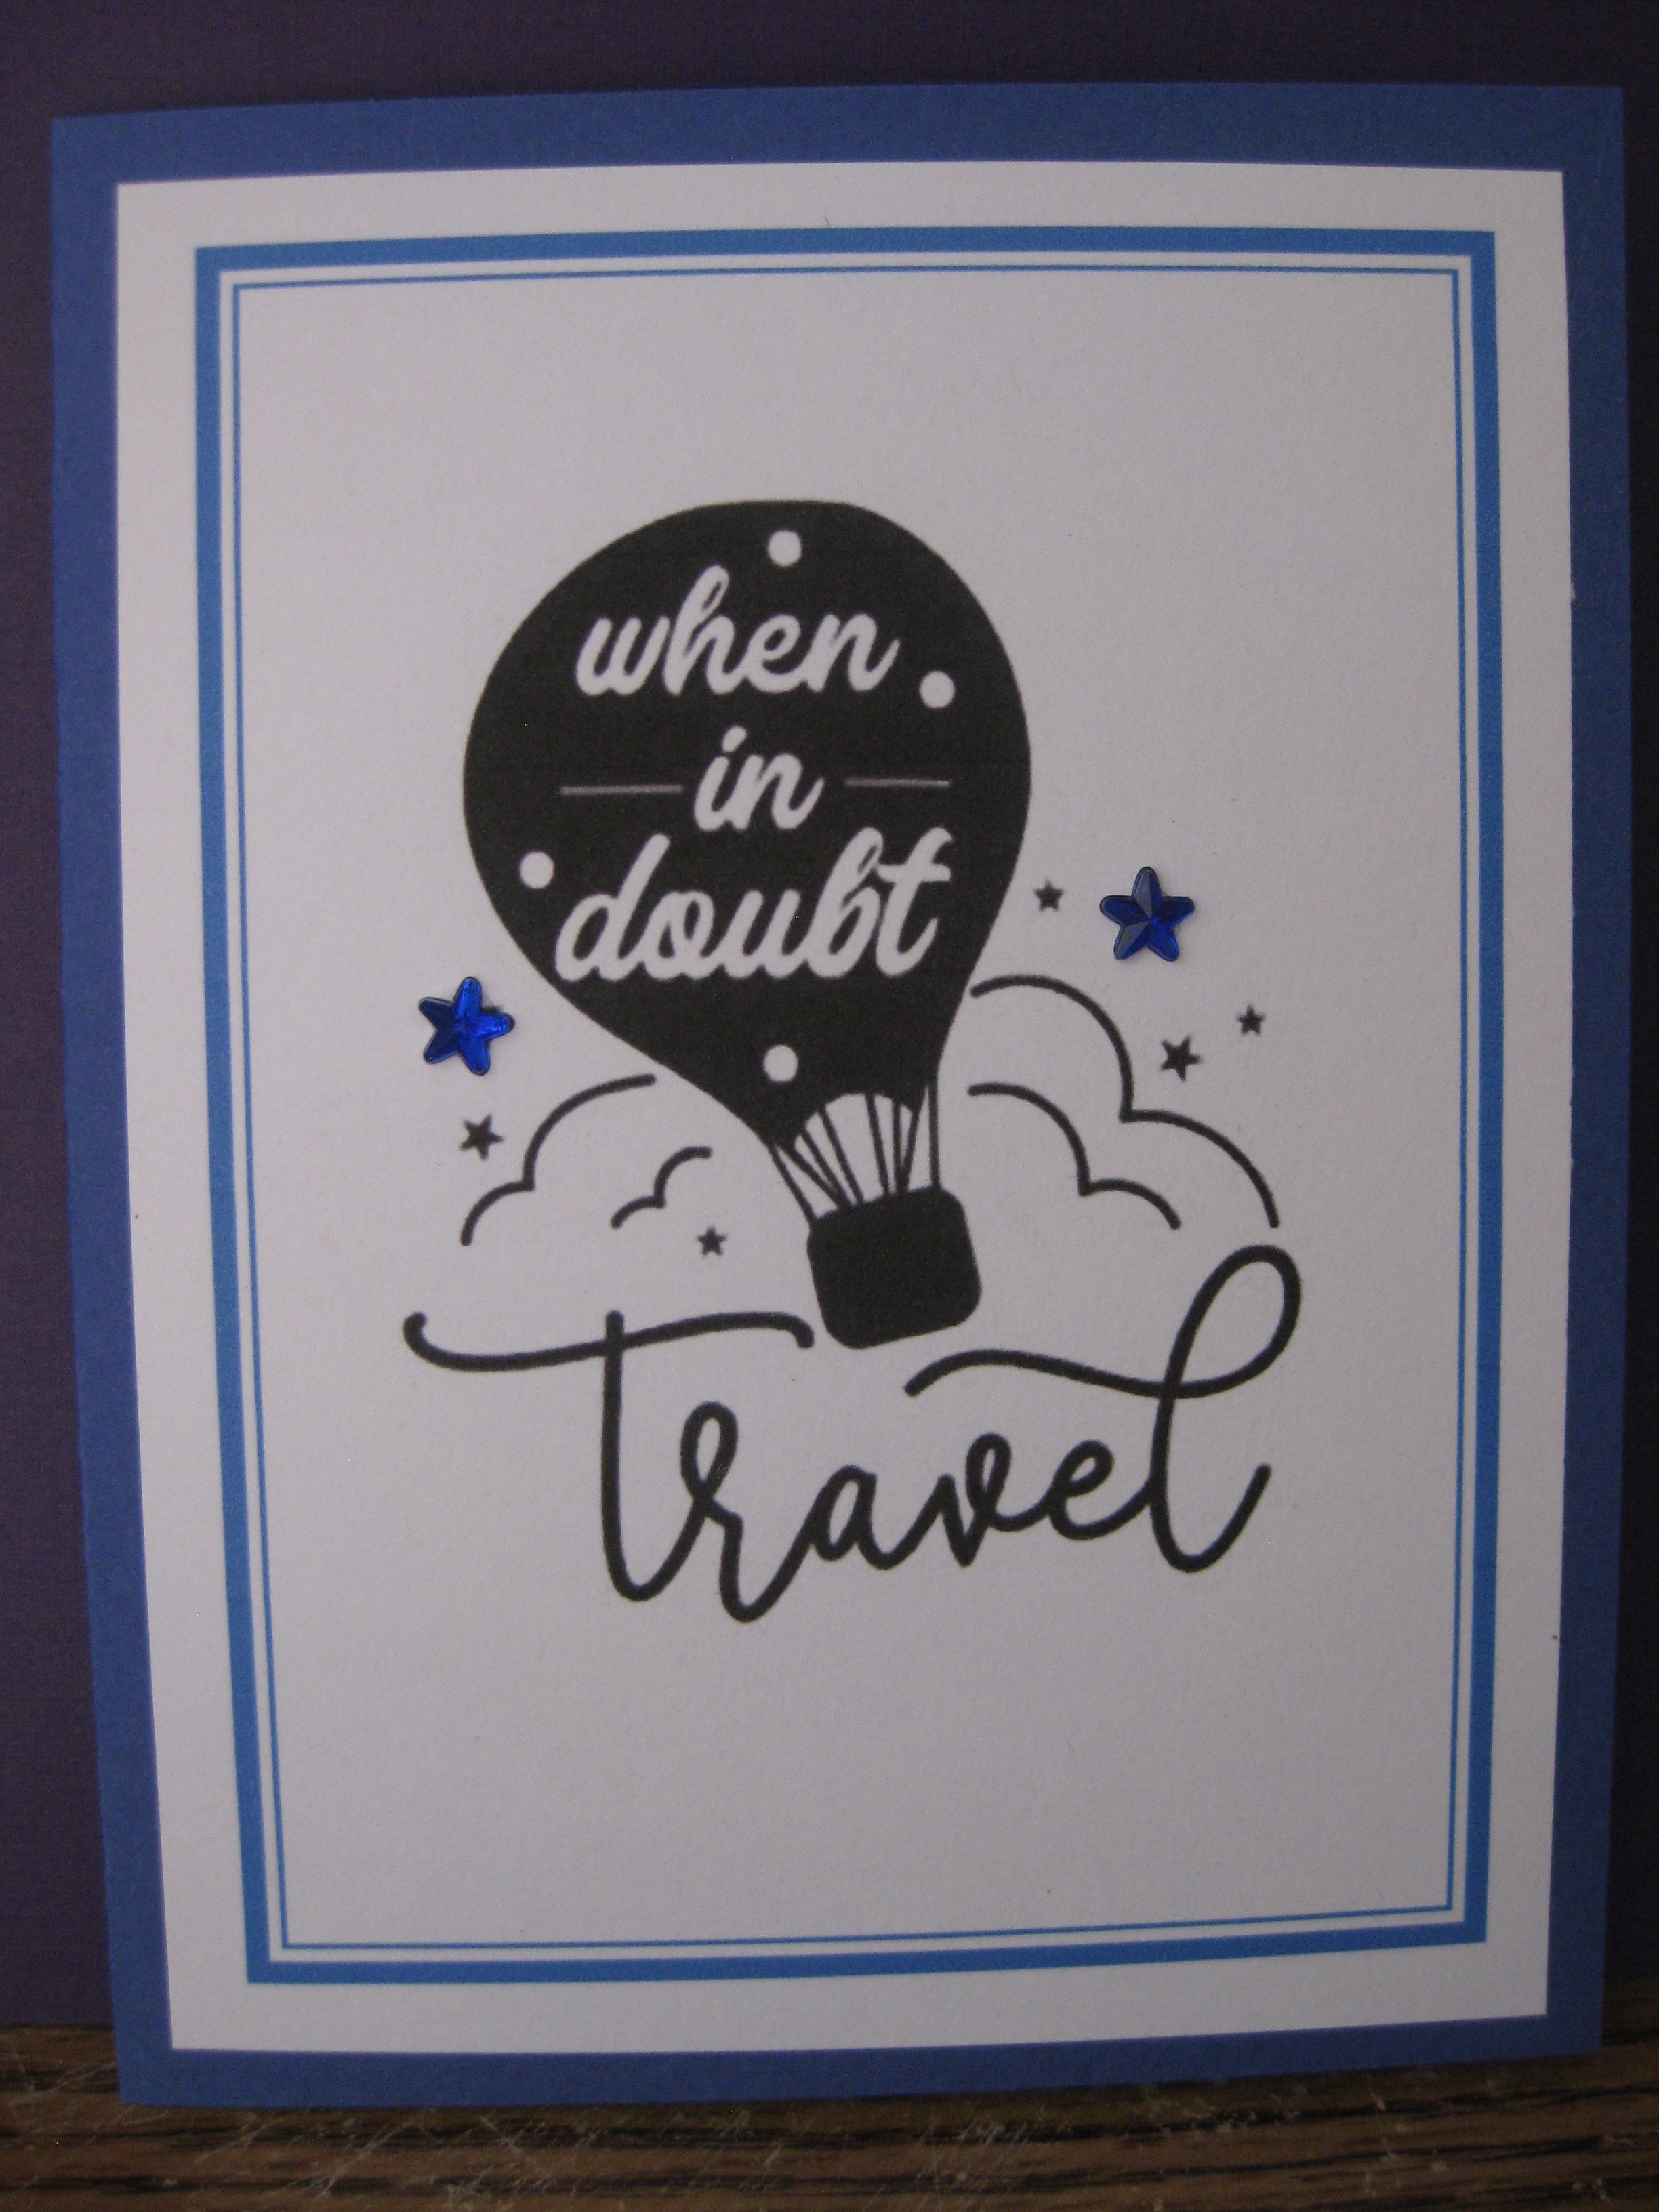 When in doubt, travel